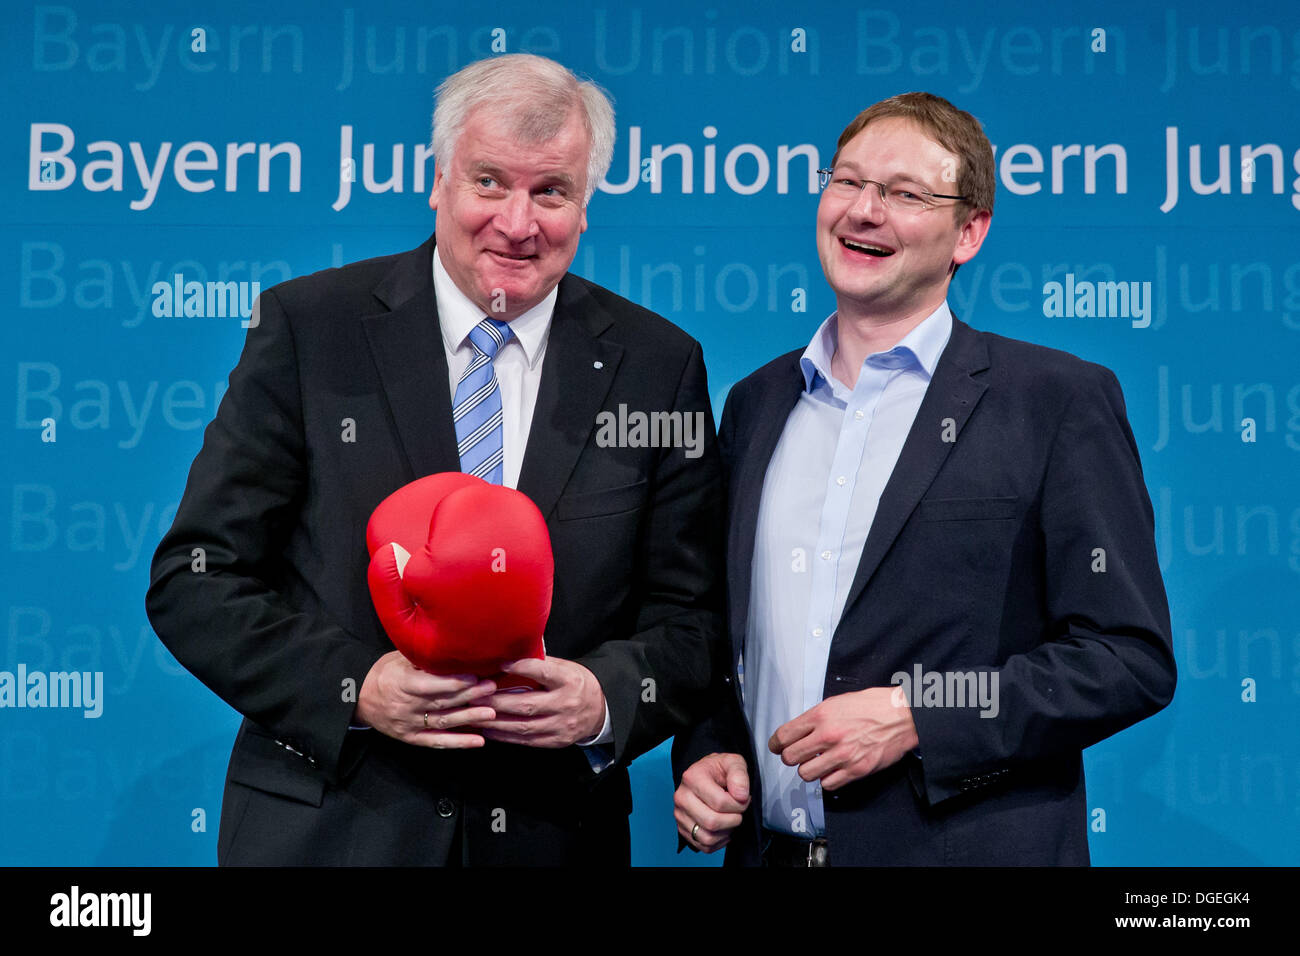 Nuremberg, Germany. 19th Oct, 2013. The new chairman of the Young Union in Bavaria, Hans Reichhart (R), presents a boxing gloves to Bavarian Premier Horst Seehofer at the Young Union party meeting in Nuremberg, Germany, 19 October 2013. Photo: Daniel Karmann/dpa/Alamy Live News Stock Photo